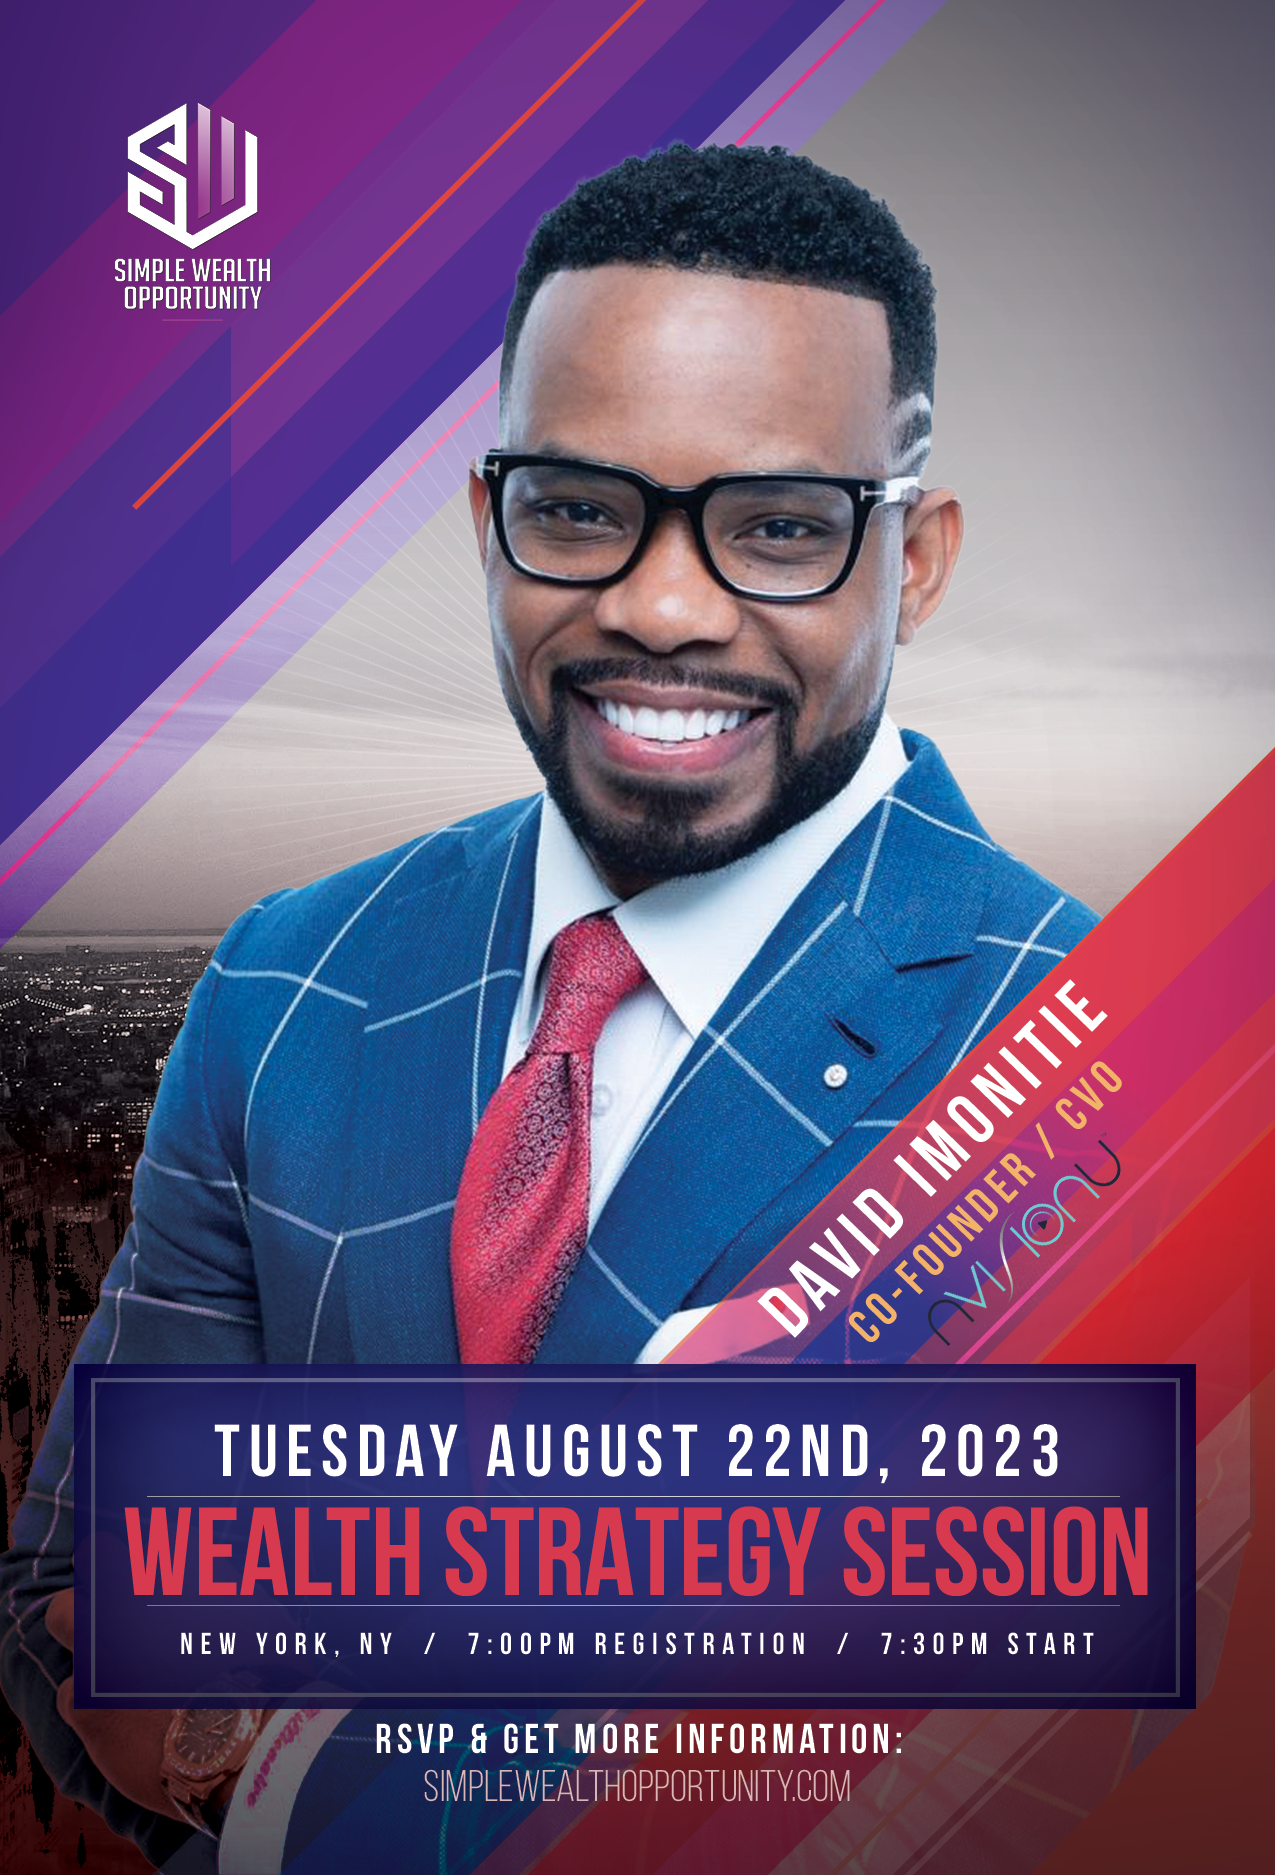 Simple Wealth Opportunity - Jersey City, NJ | WEALTH STRATEGY SESSION WITH MR. DAVID IMONITIE IN NYC! | Tue, Aug 22, 2023 @ 7:00 PM